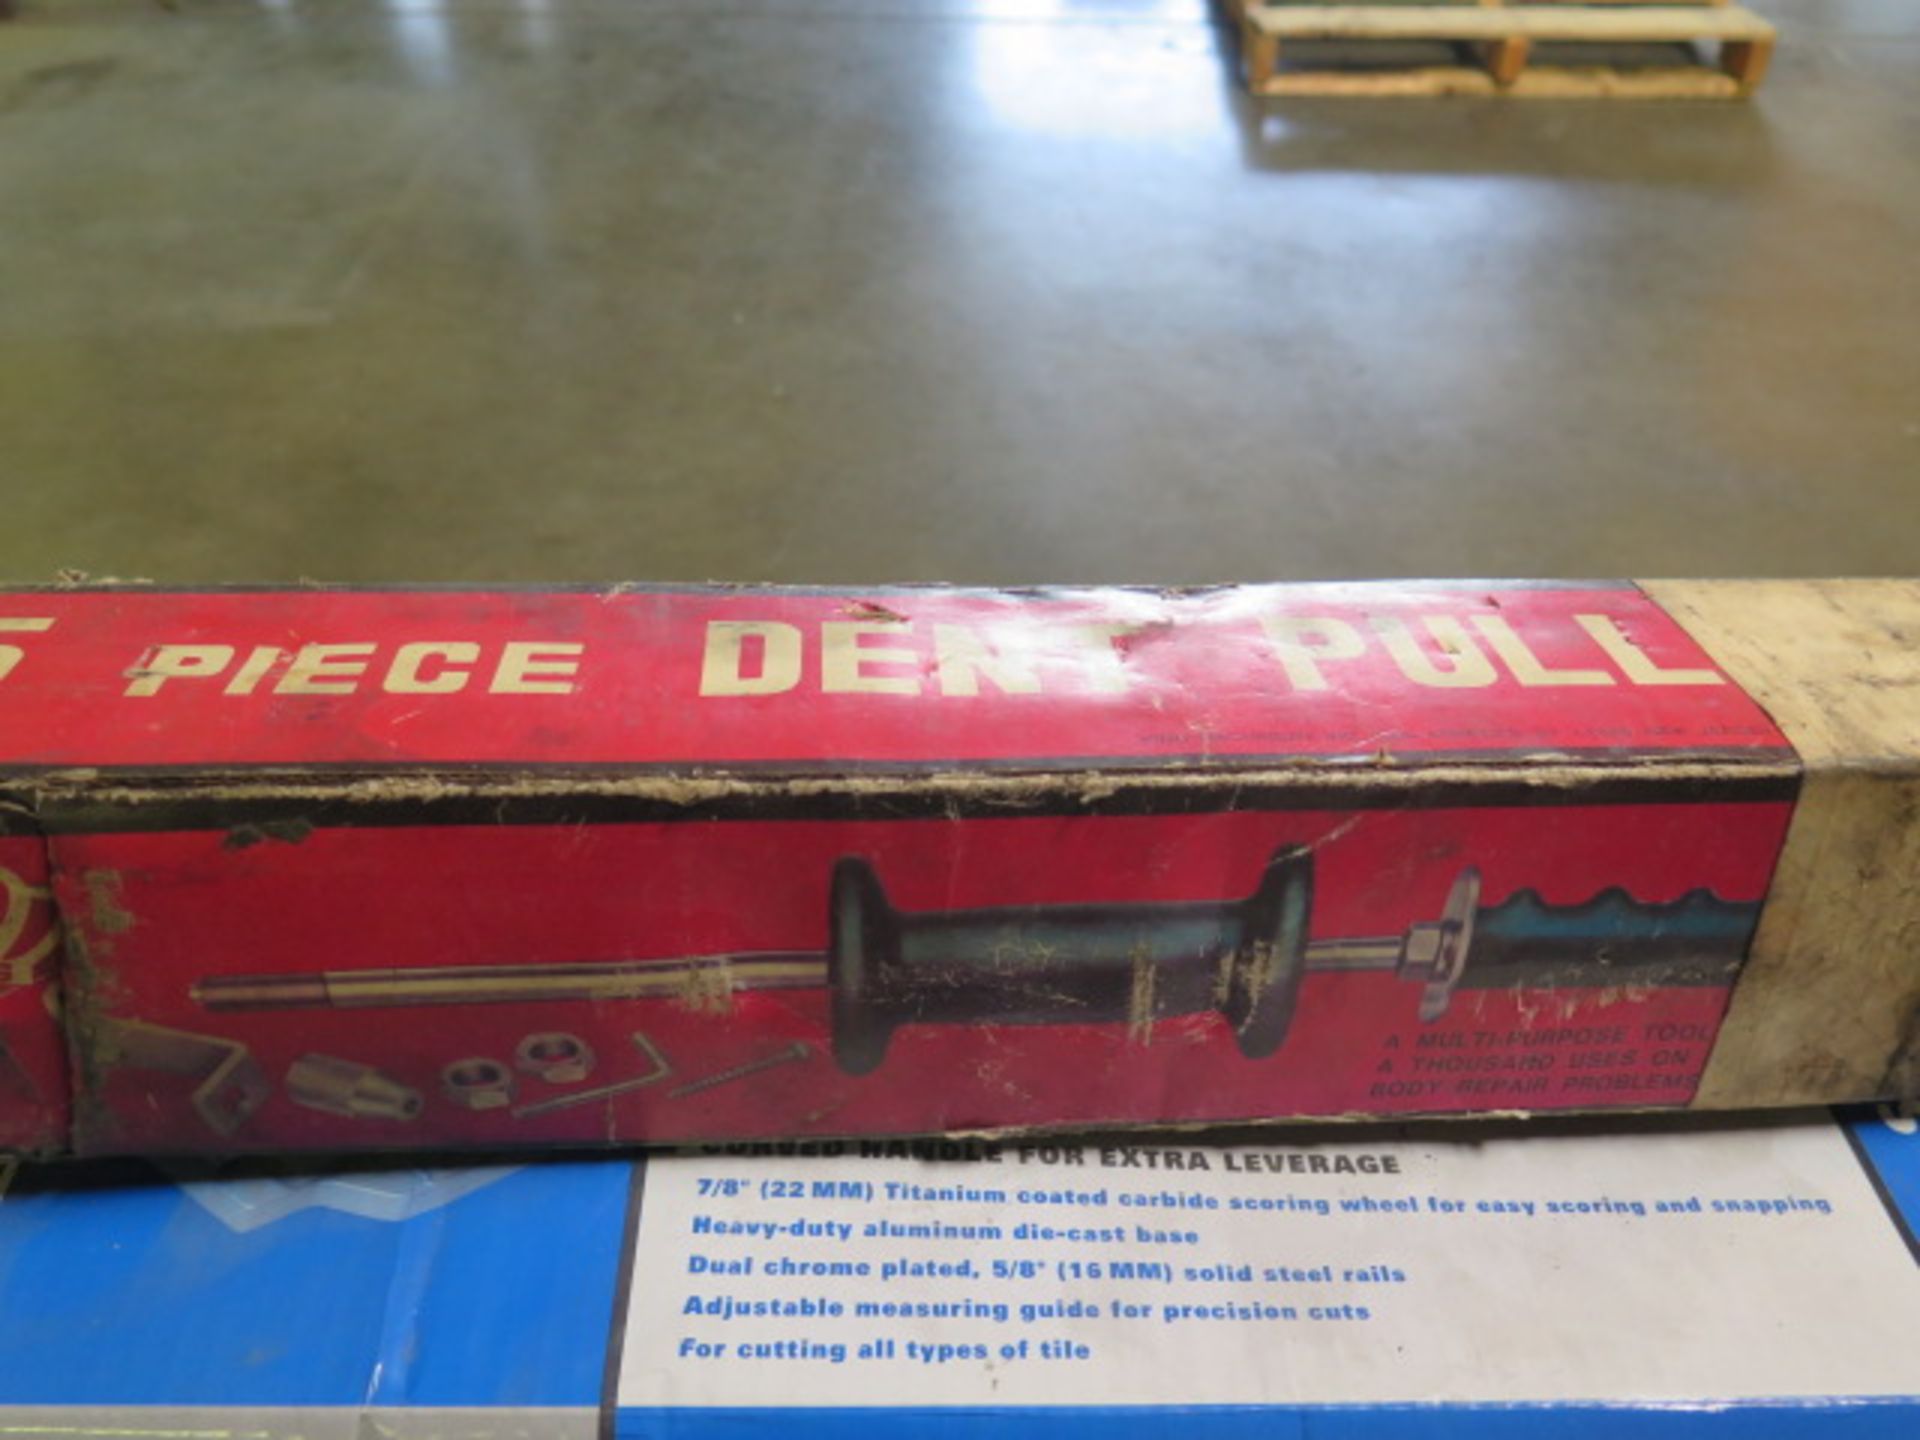 Tile Cutter, Dent Puller and Wedge Kit (SOLD AS-IS - NO WARRANTY) - Image 3 of 5